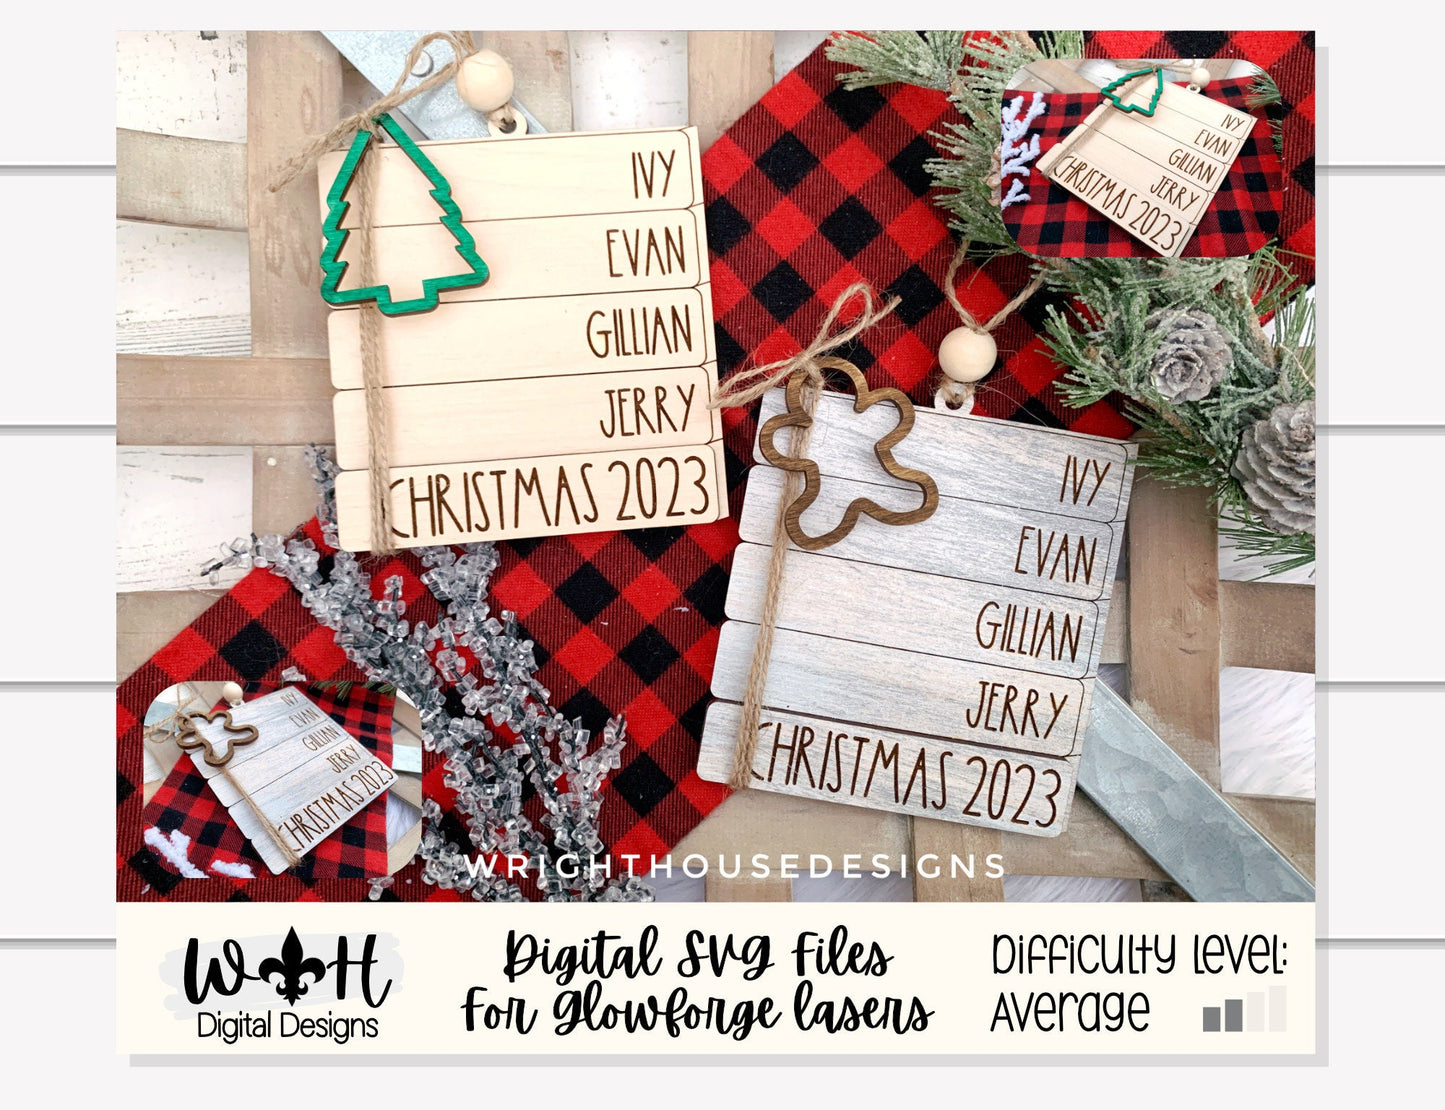 Custom Bookstack Ornaments - Personalizable Family Name Ornaments and Stocking Tags - Cut File For Glowforge Lasers - Digital SVG File